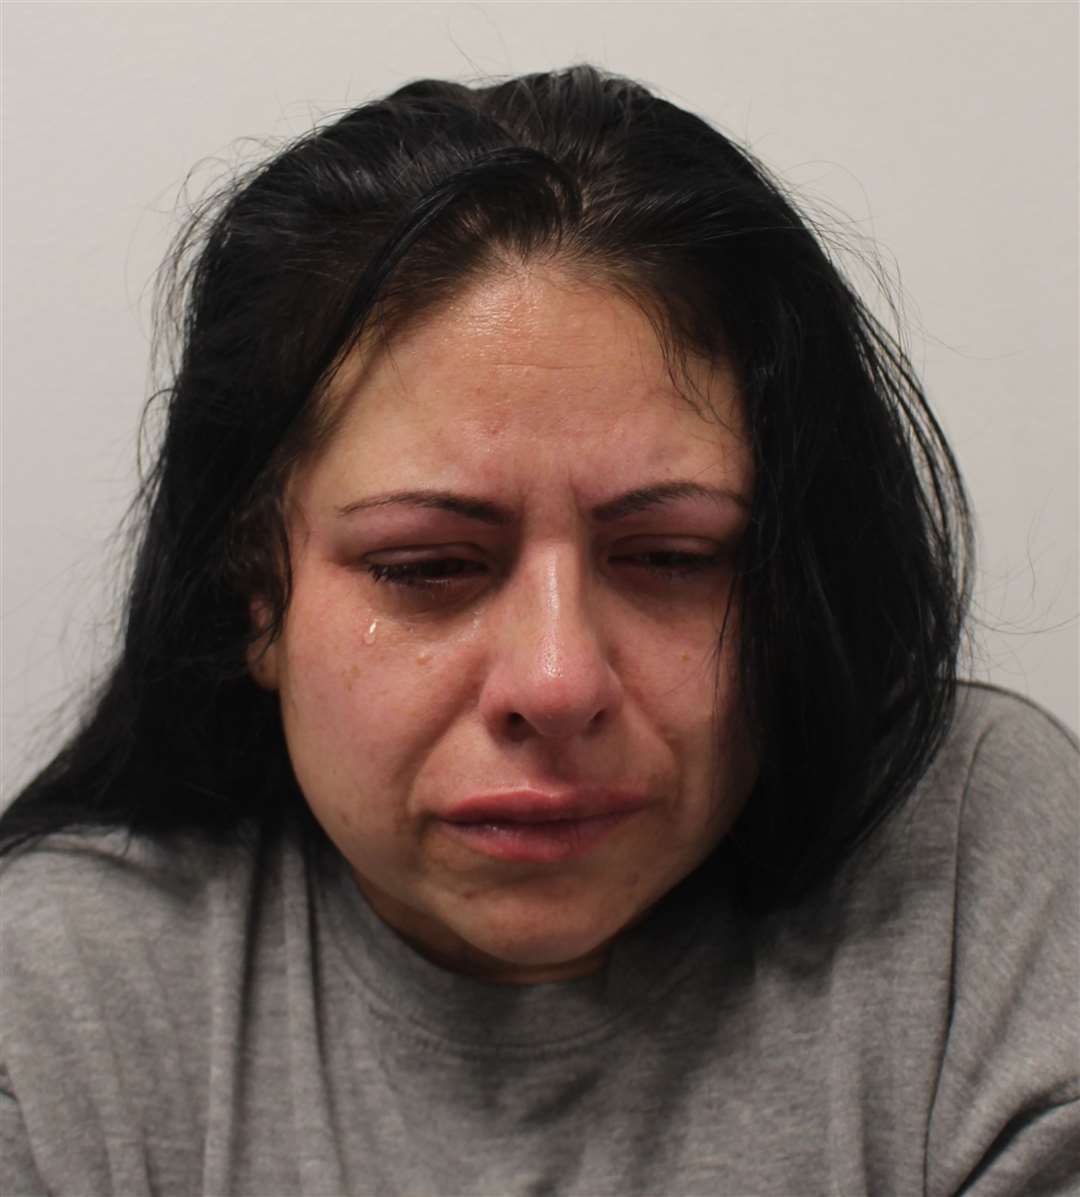 Simone Fortune, 37, from Gravesend set up a close family friend as part of a plot to steal goods from him. Photo: Metropolitan Police